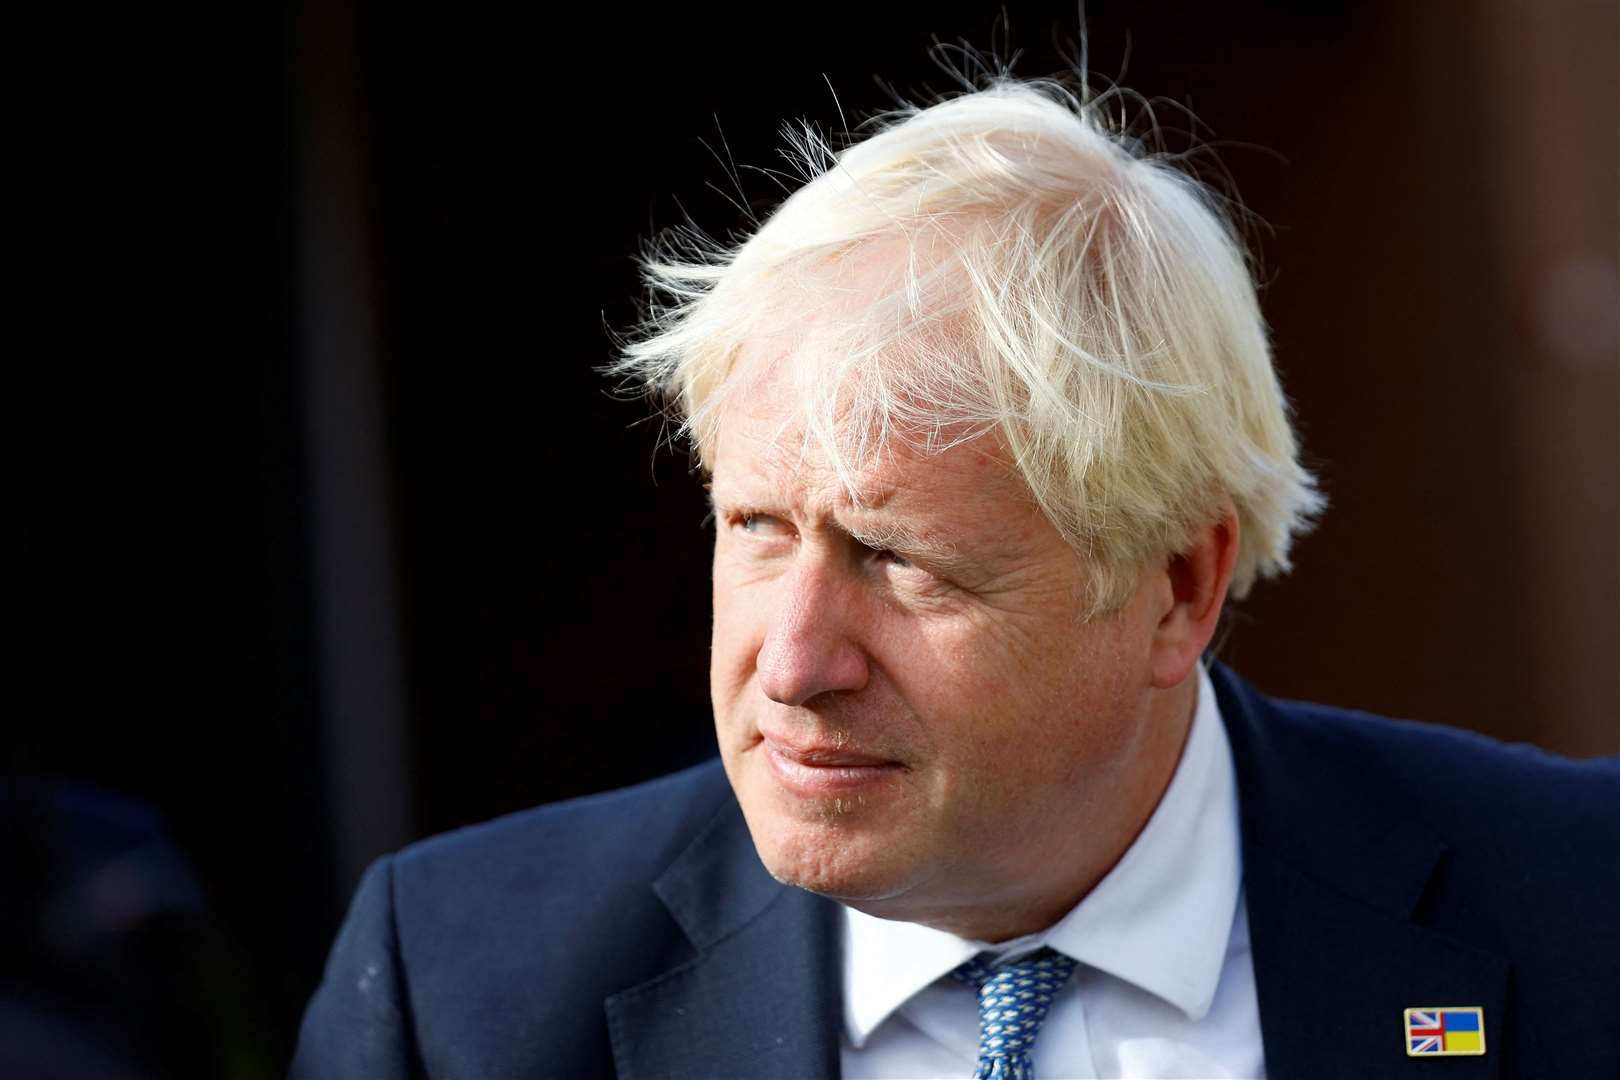 The Covid Inquiry has sent Boris Johnson a list of 150 questions and requests for his witness statement (Andrew Boyers/PA)